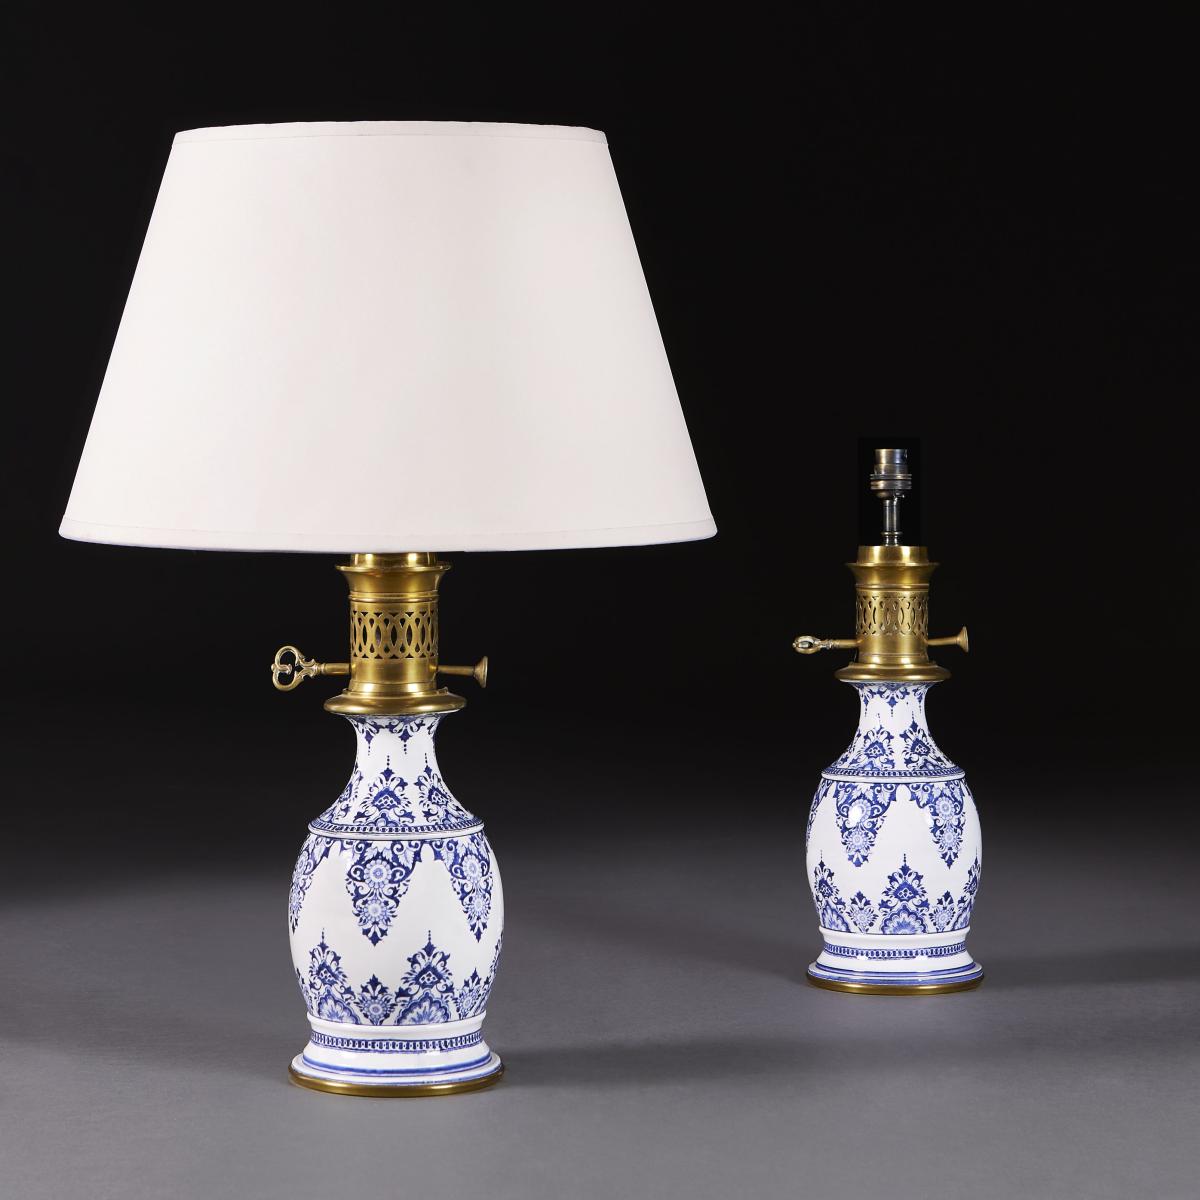 A Pair of Rouen Faience Lamps